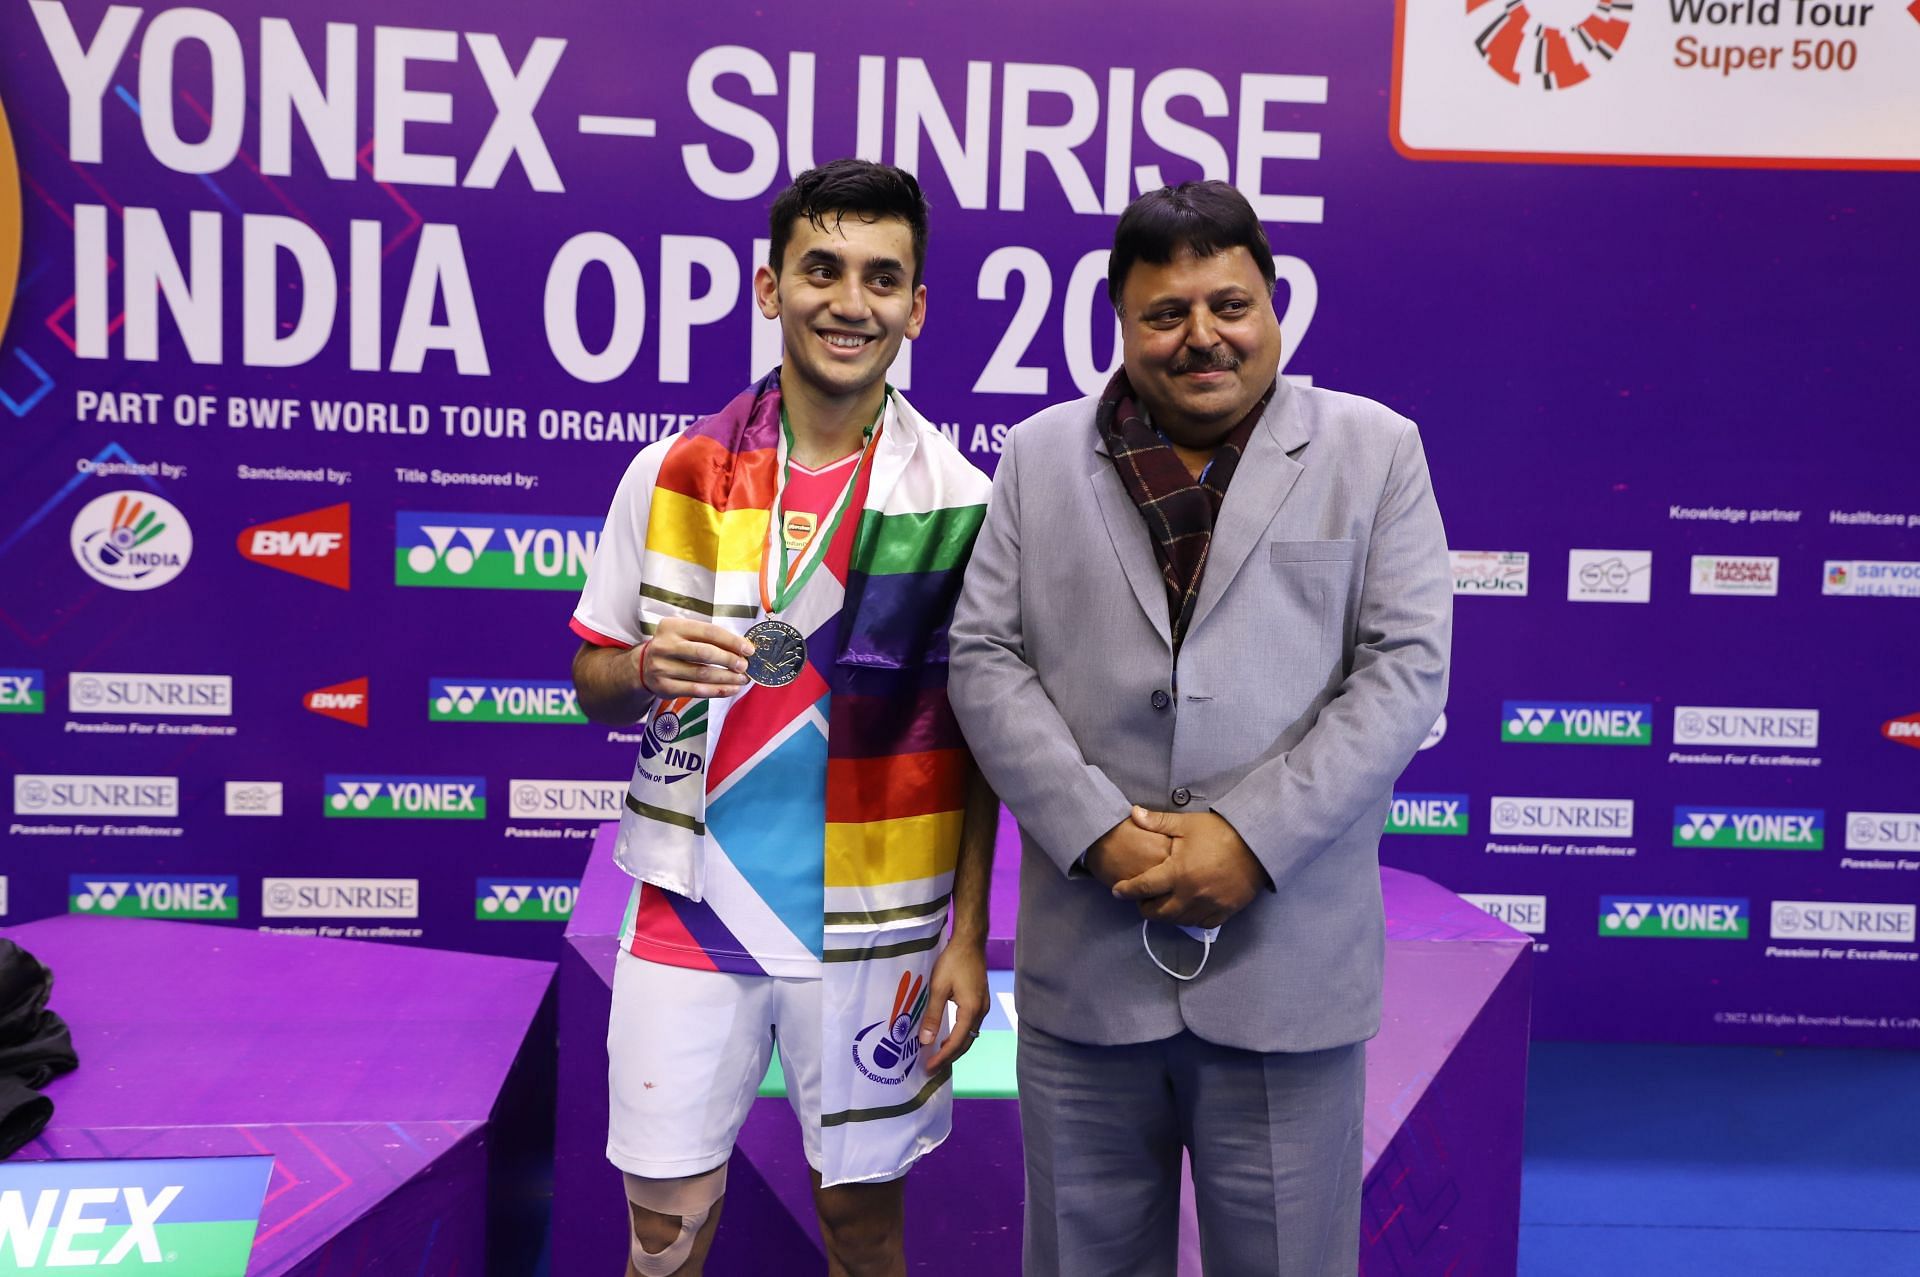 BAI secretary Ajay Kumar Singhania (R) with Lakshya Sen after the India Open in New Delhi. (Picture: BAI)